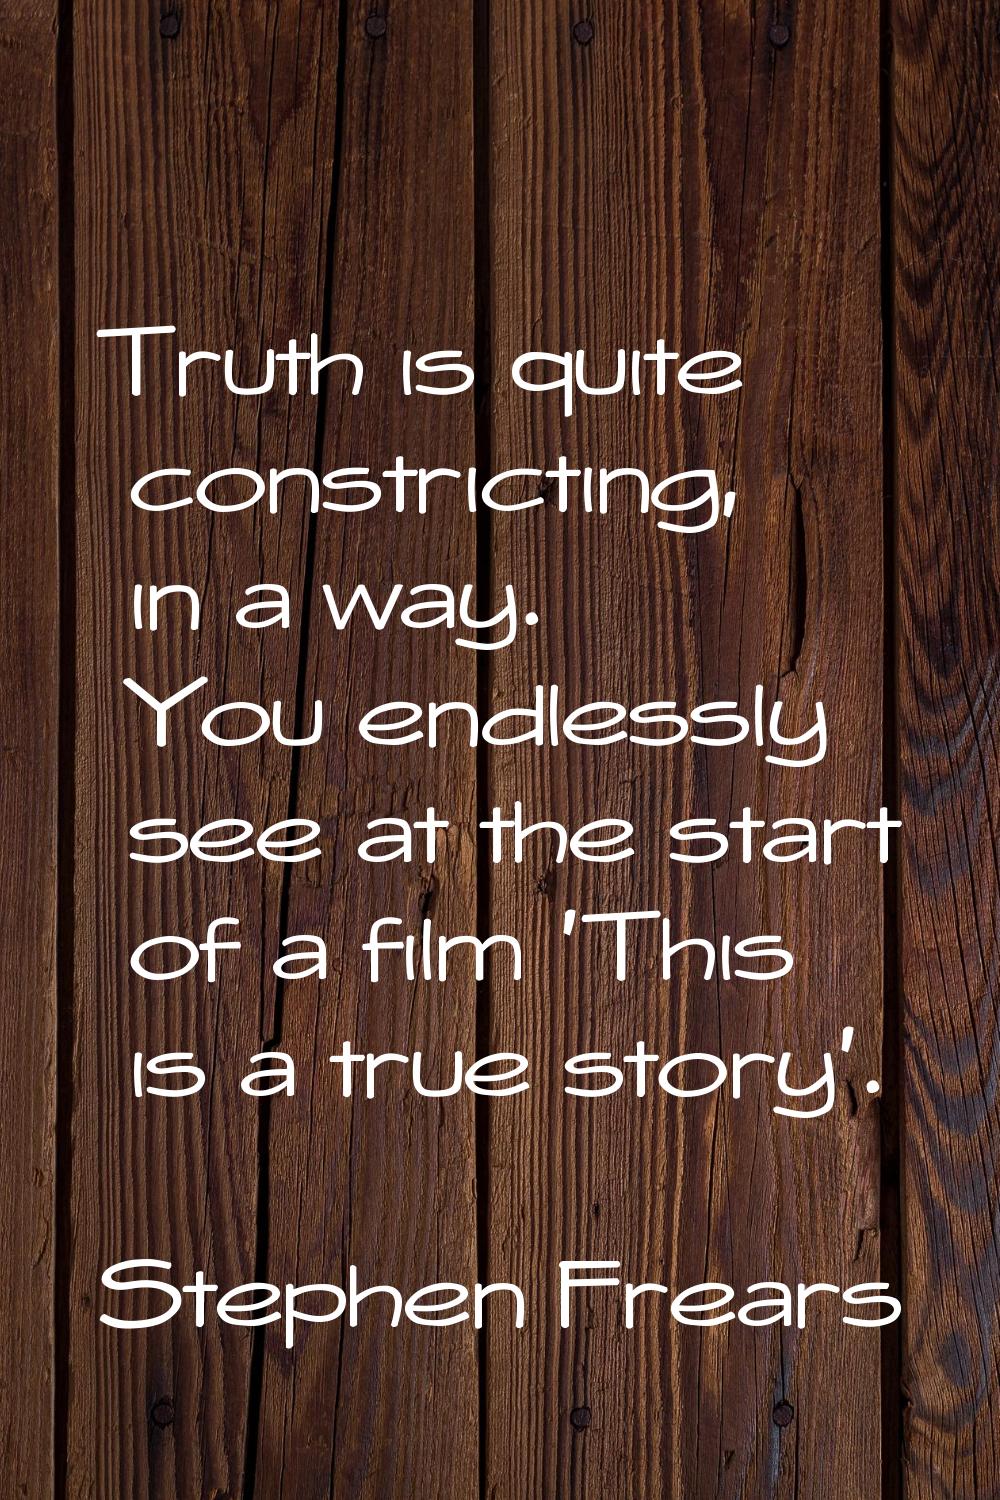 Truth is quite constricting, in a way. You endlessly see at the start of a film 'This is a true sto